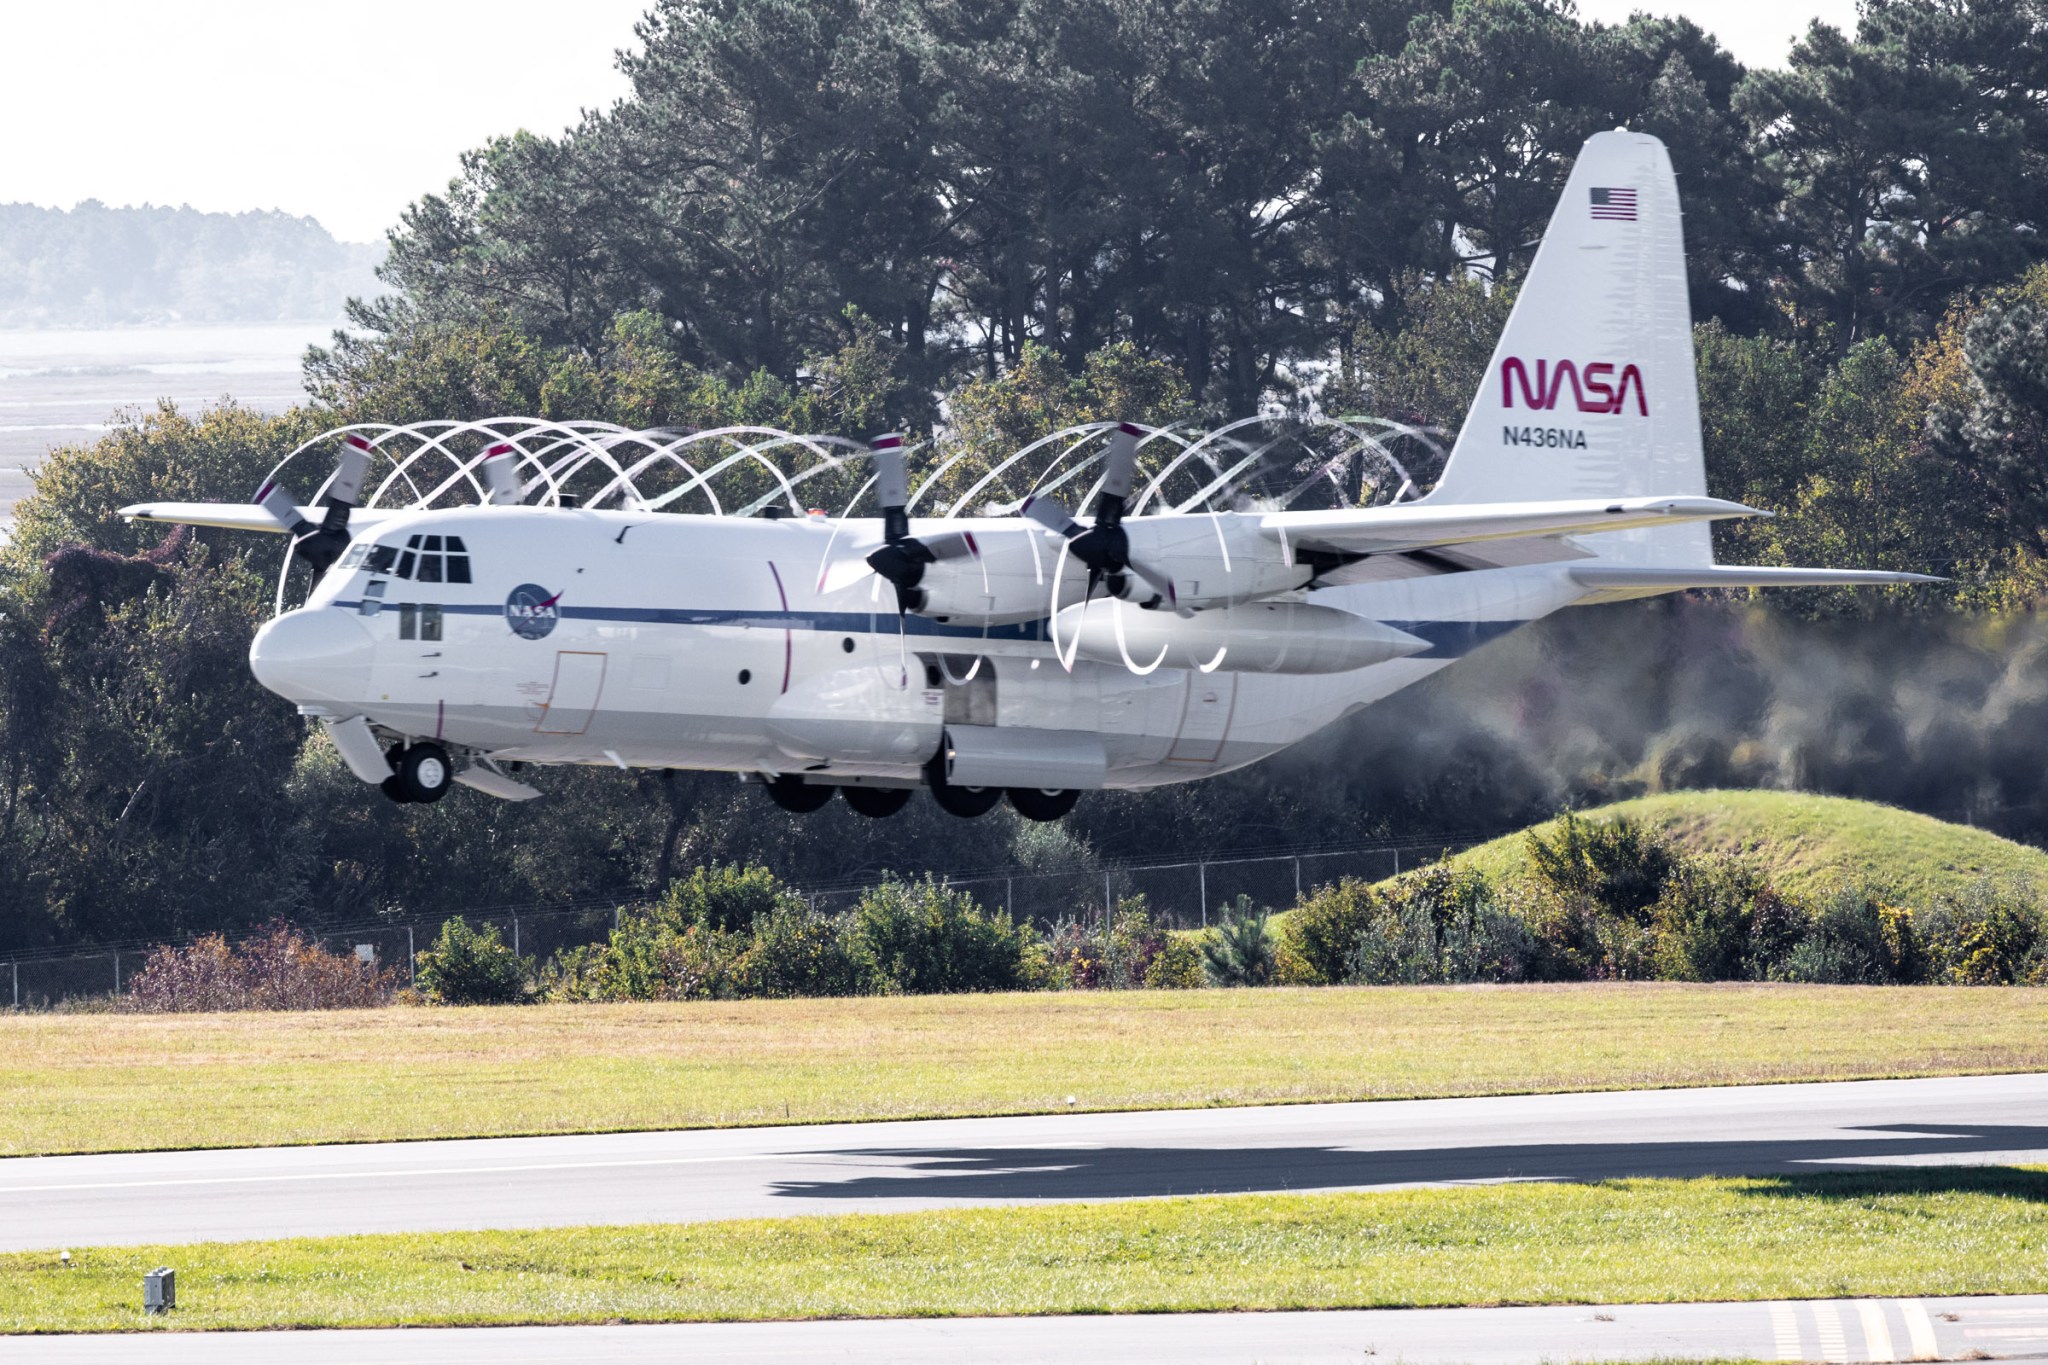 The C-130 aircraft, a white plane with a blue strip down the side, taking off from a runway with a thick tree line in the background.